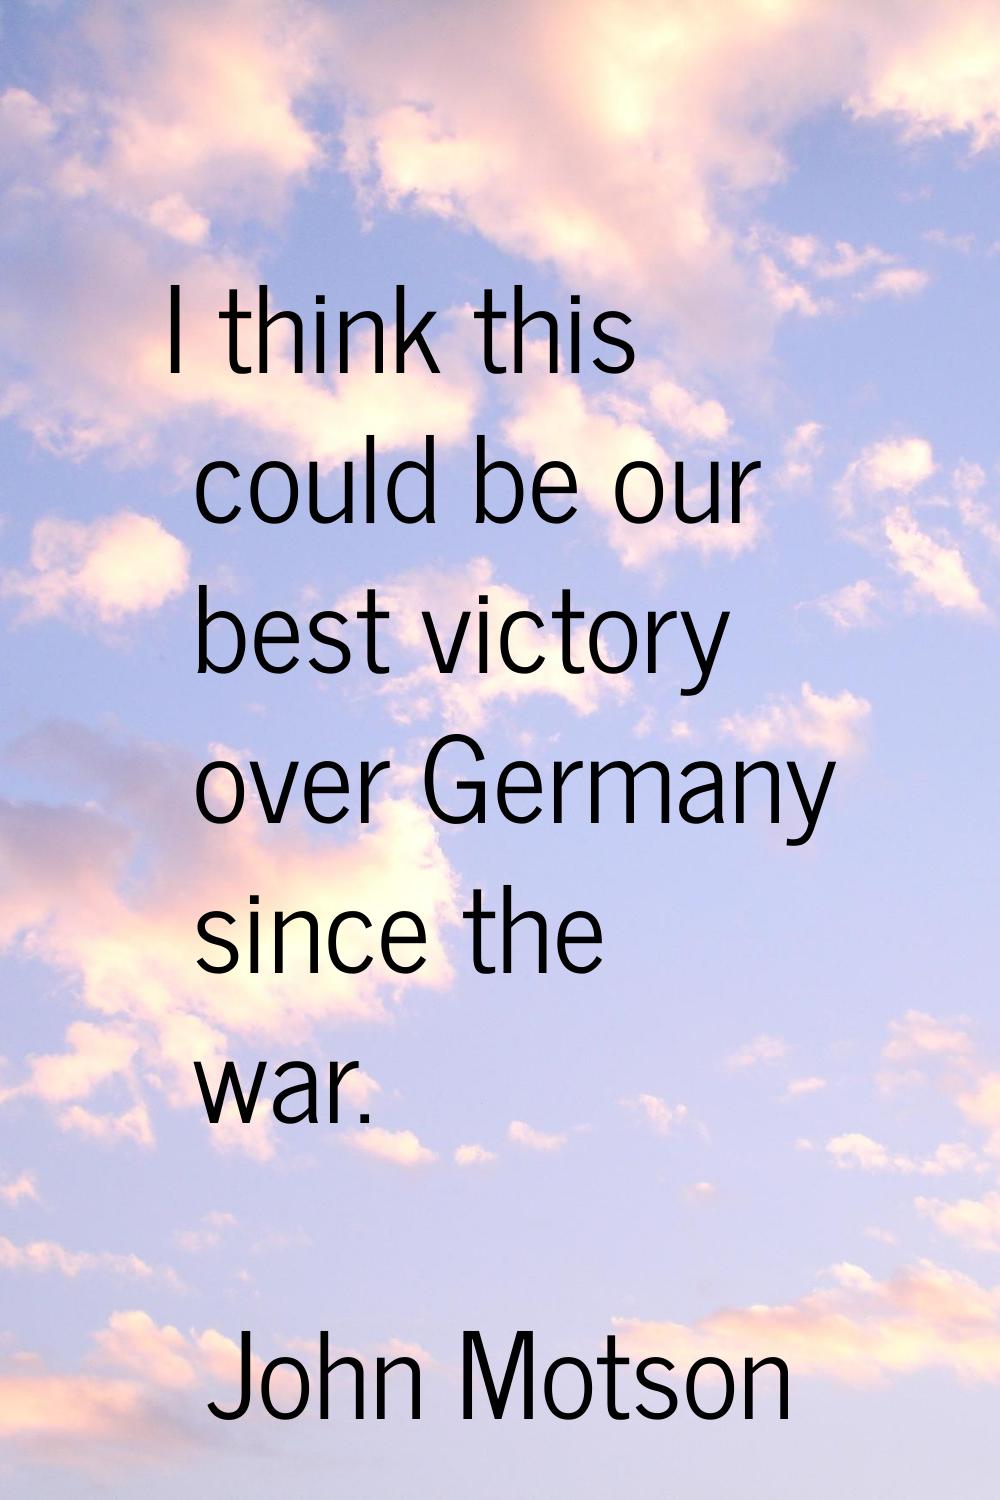 I think this could be our best victory over Germany since the war.